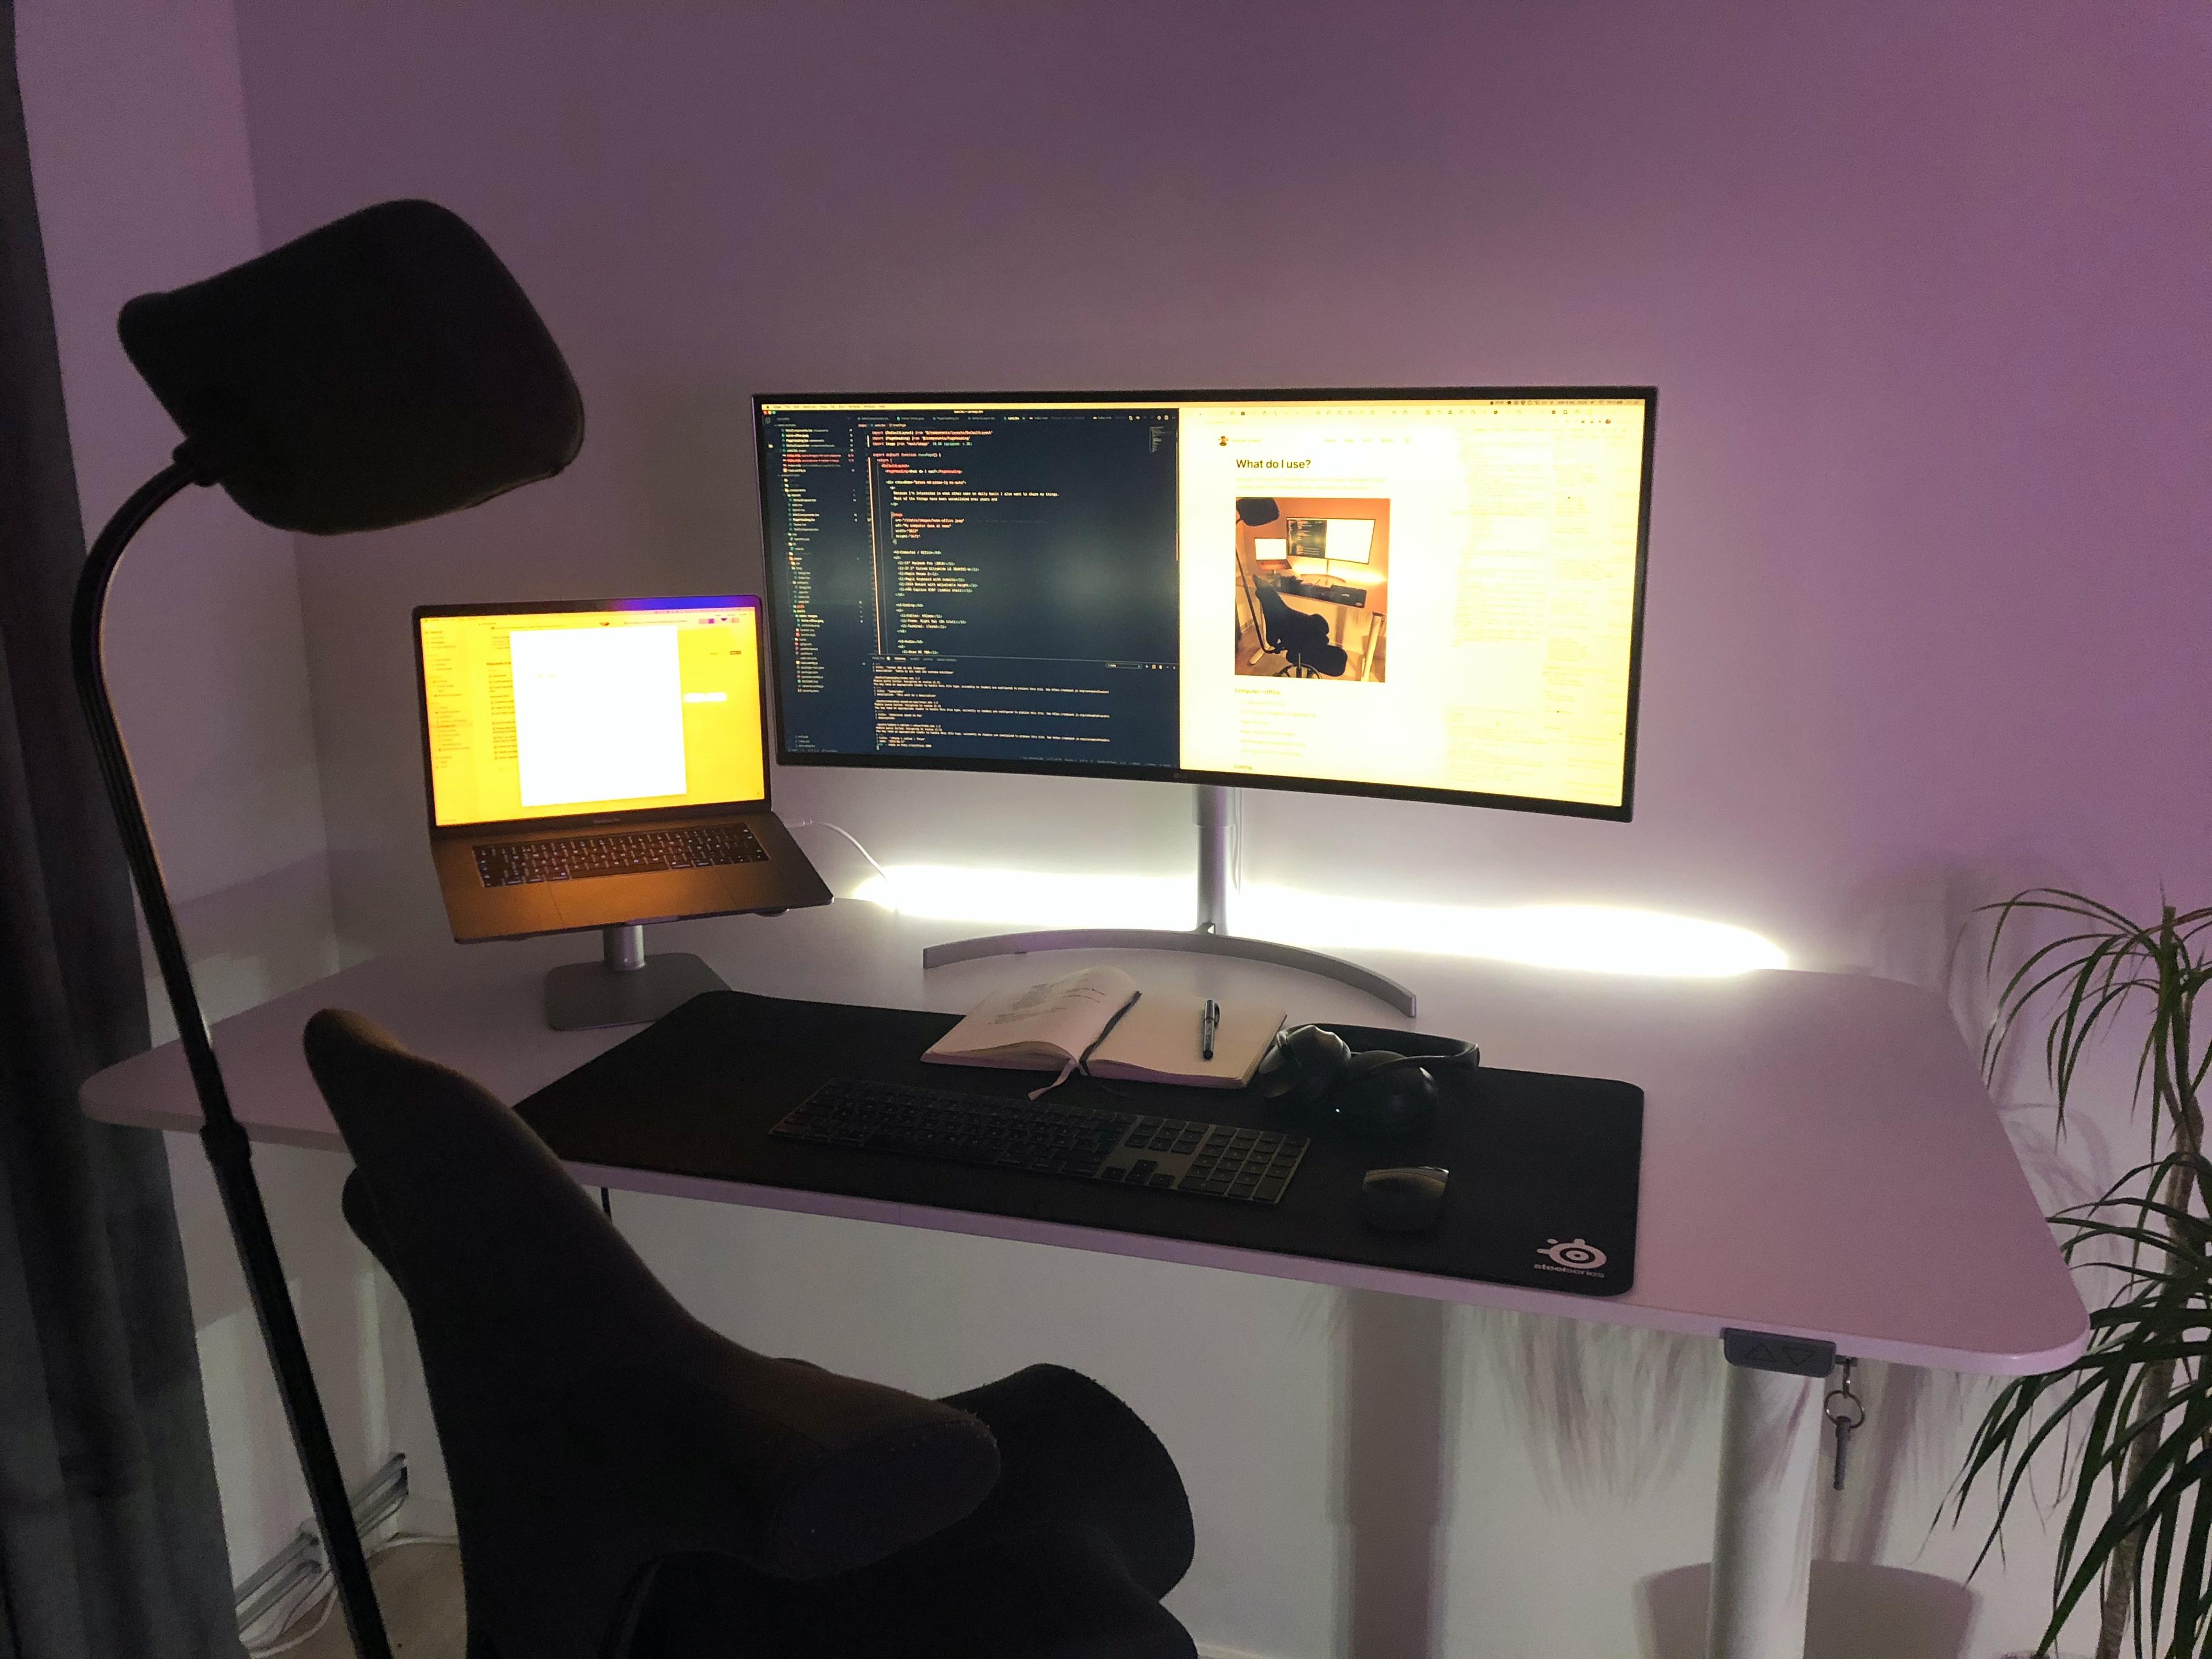 My computer desk at home